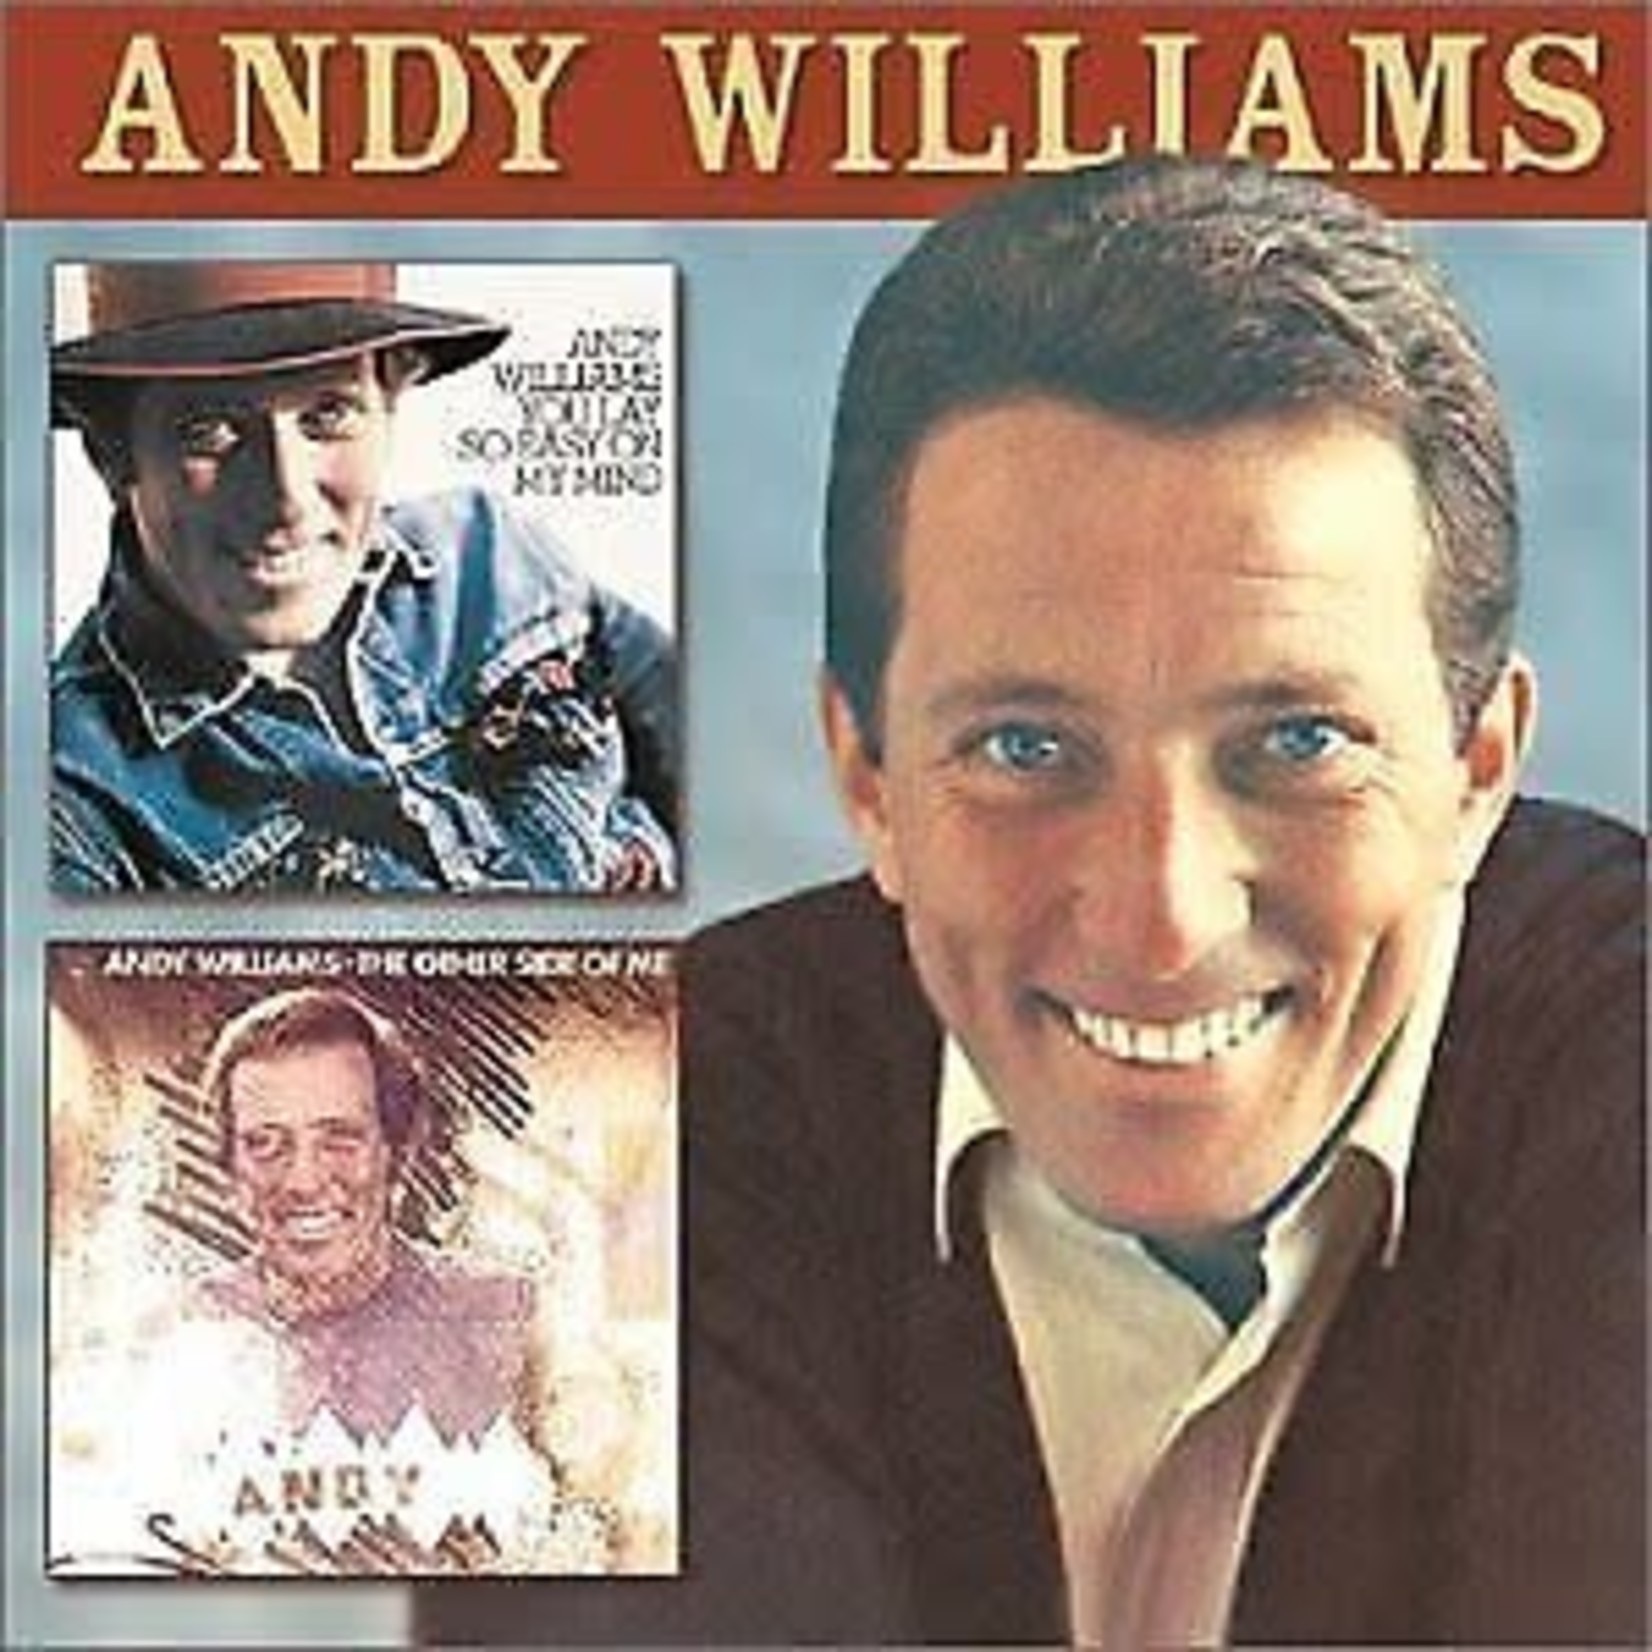 Andy Williams - You Lay So Easy/The Other Side Of Me [CD]